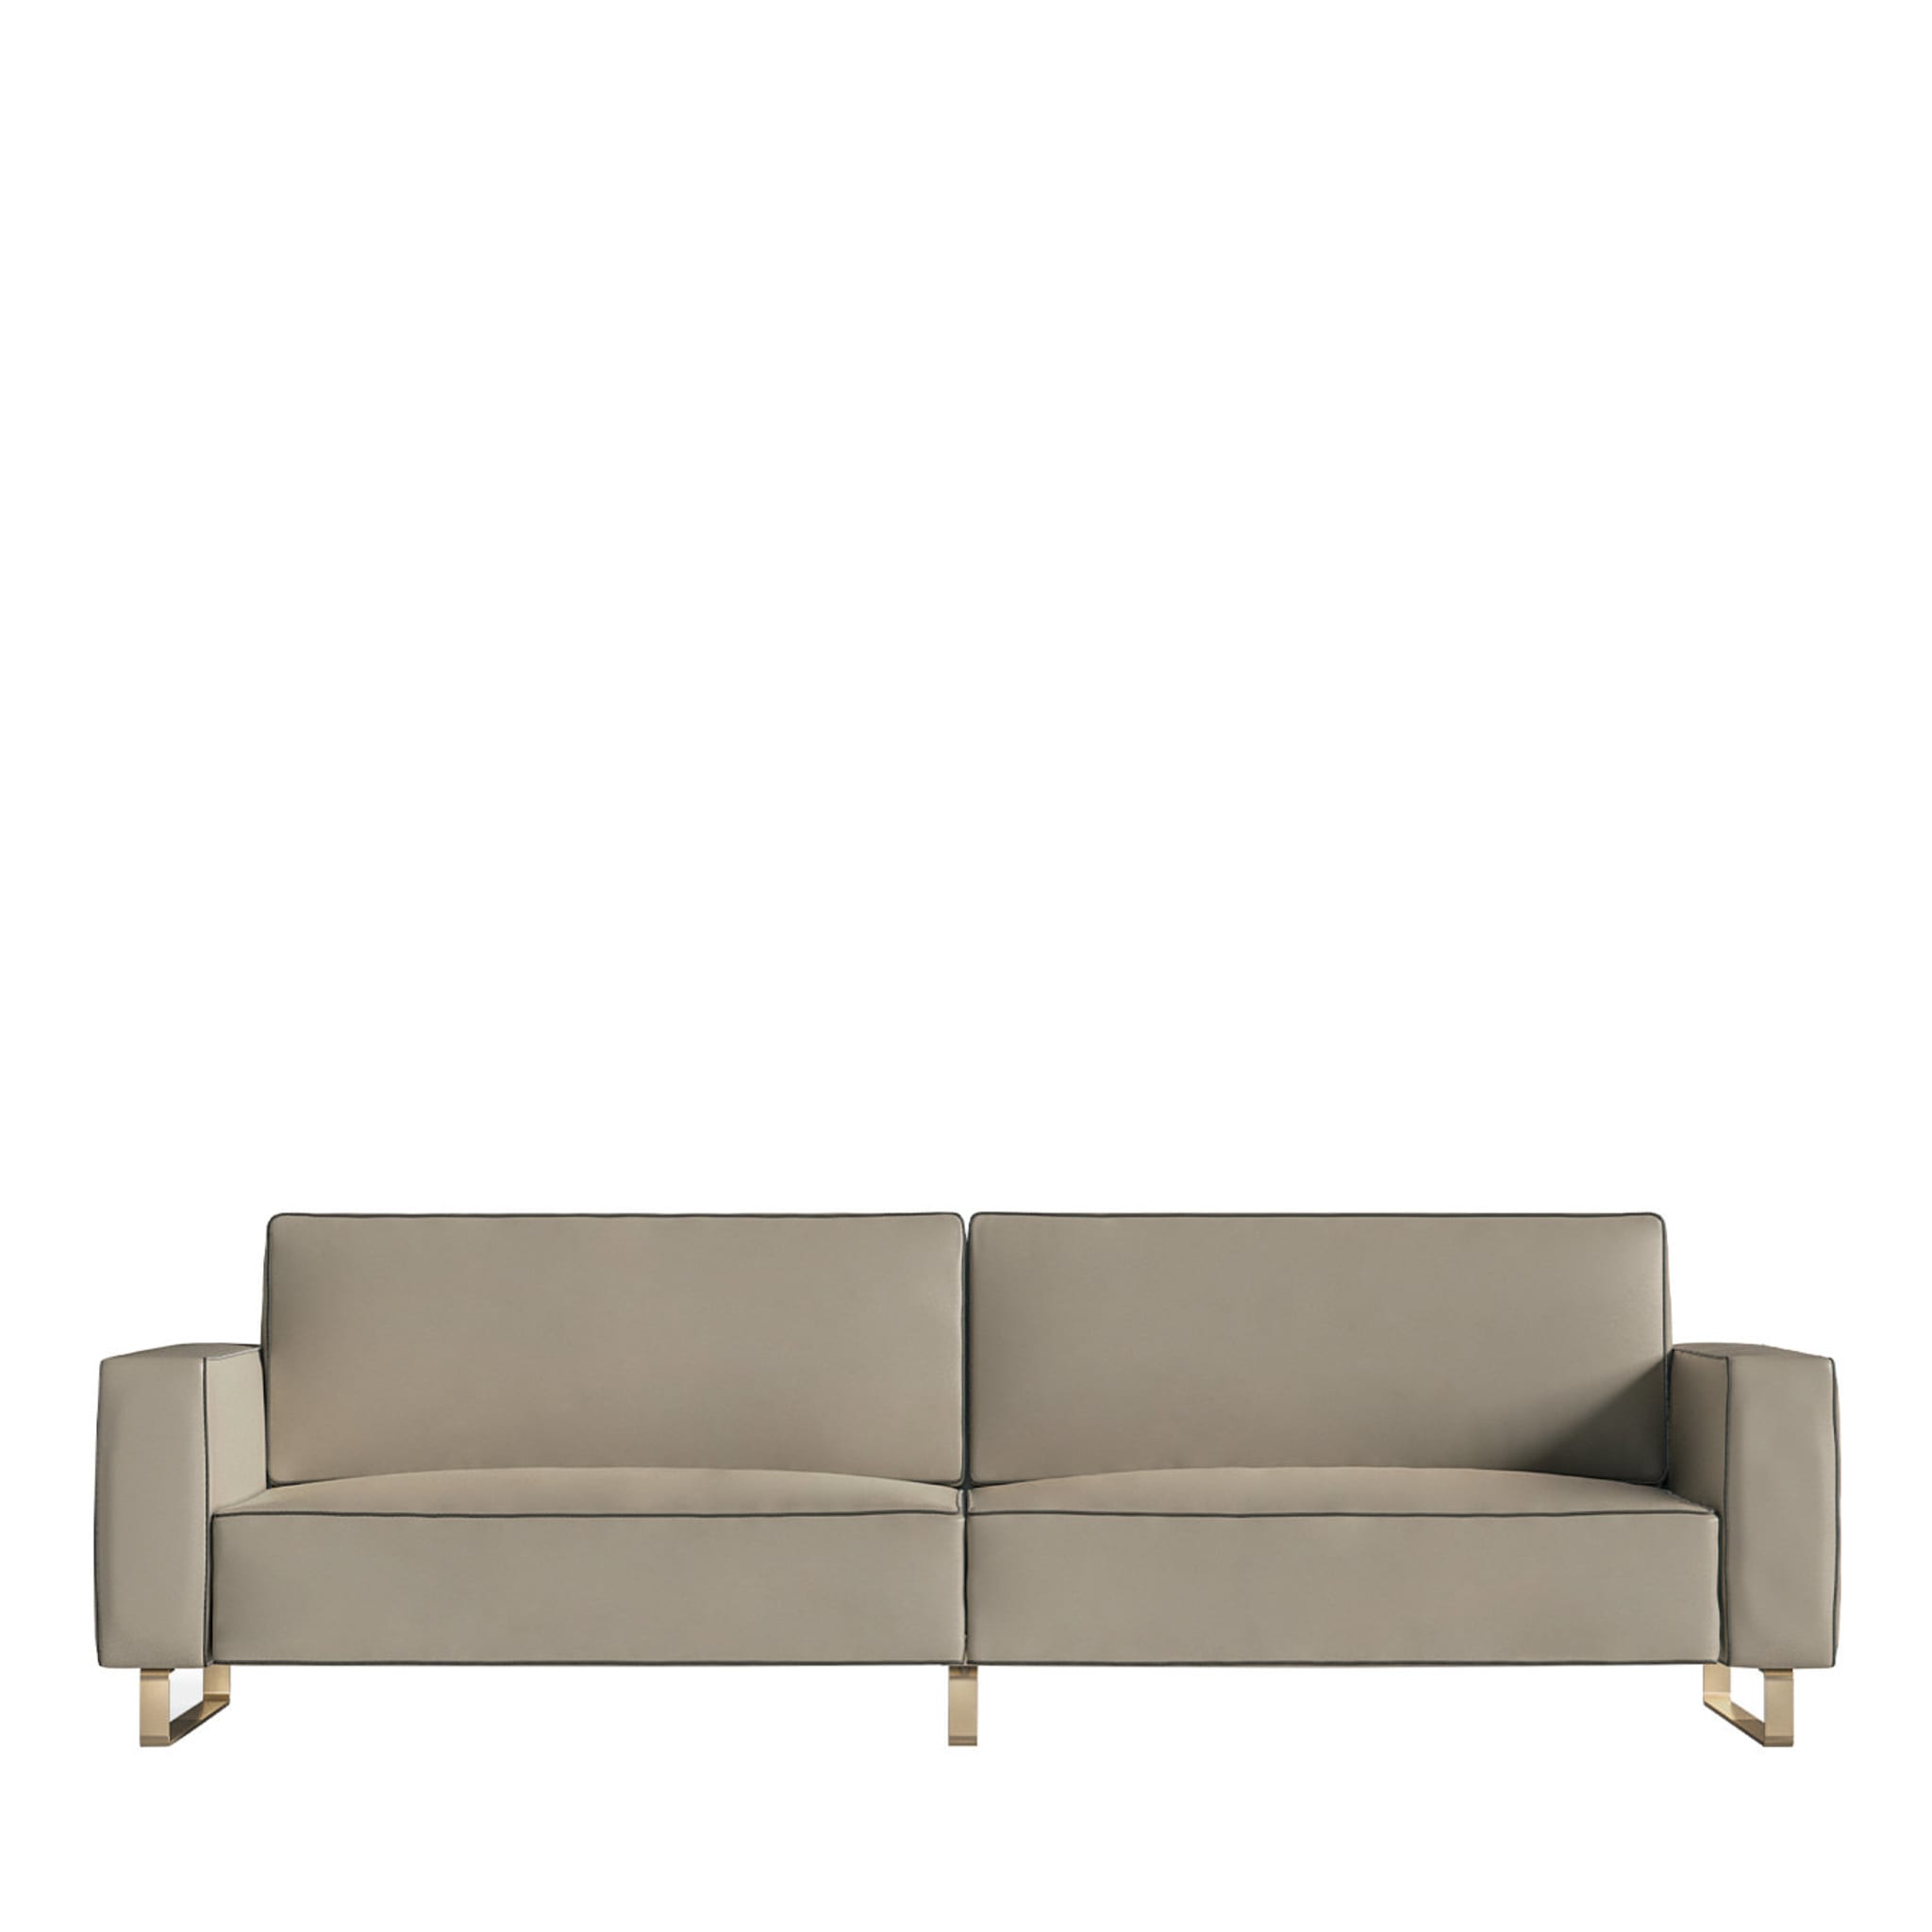 Beige 3-Seater Leather Sofa - Main view